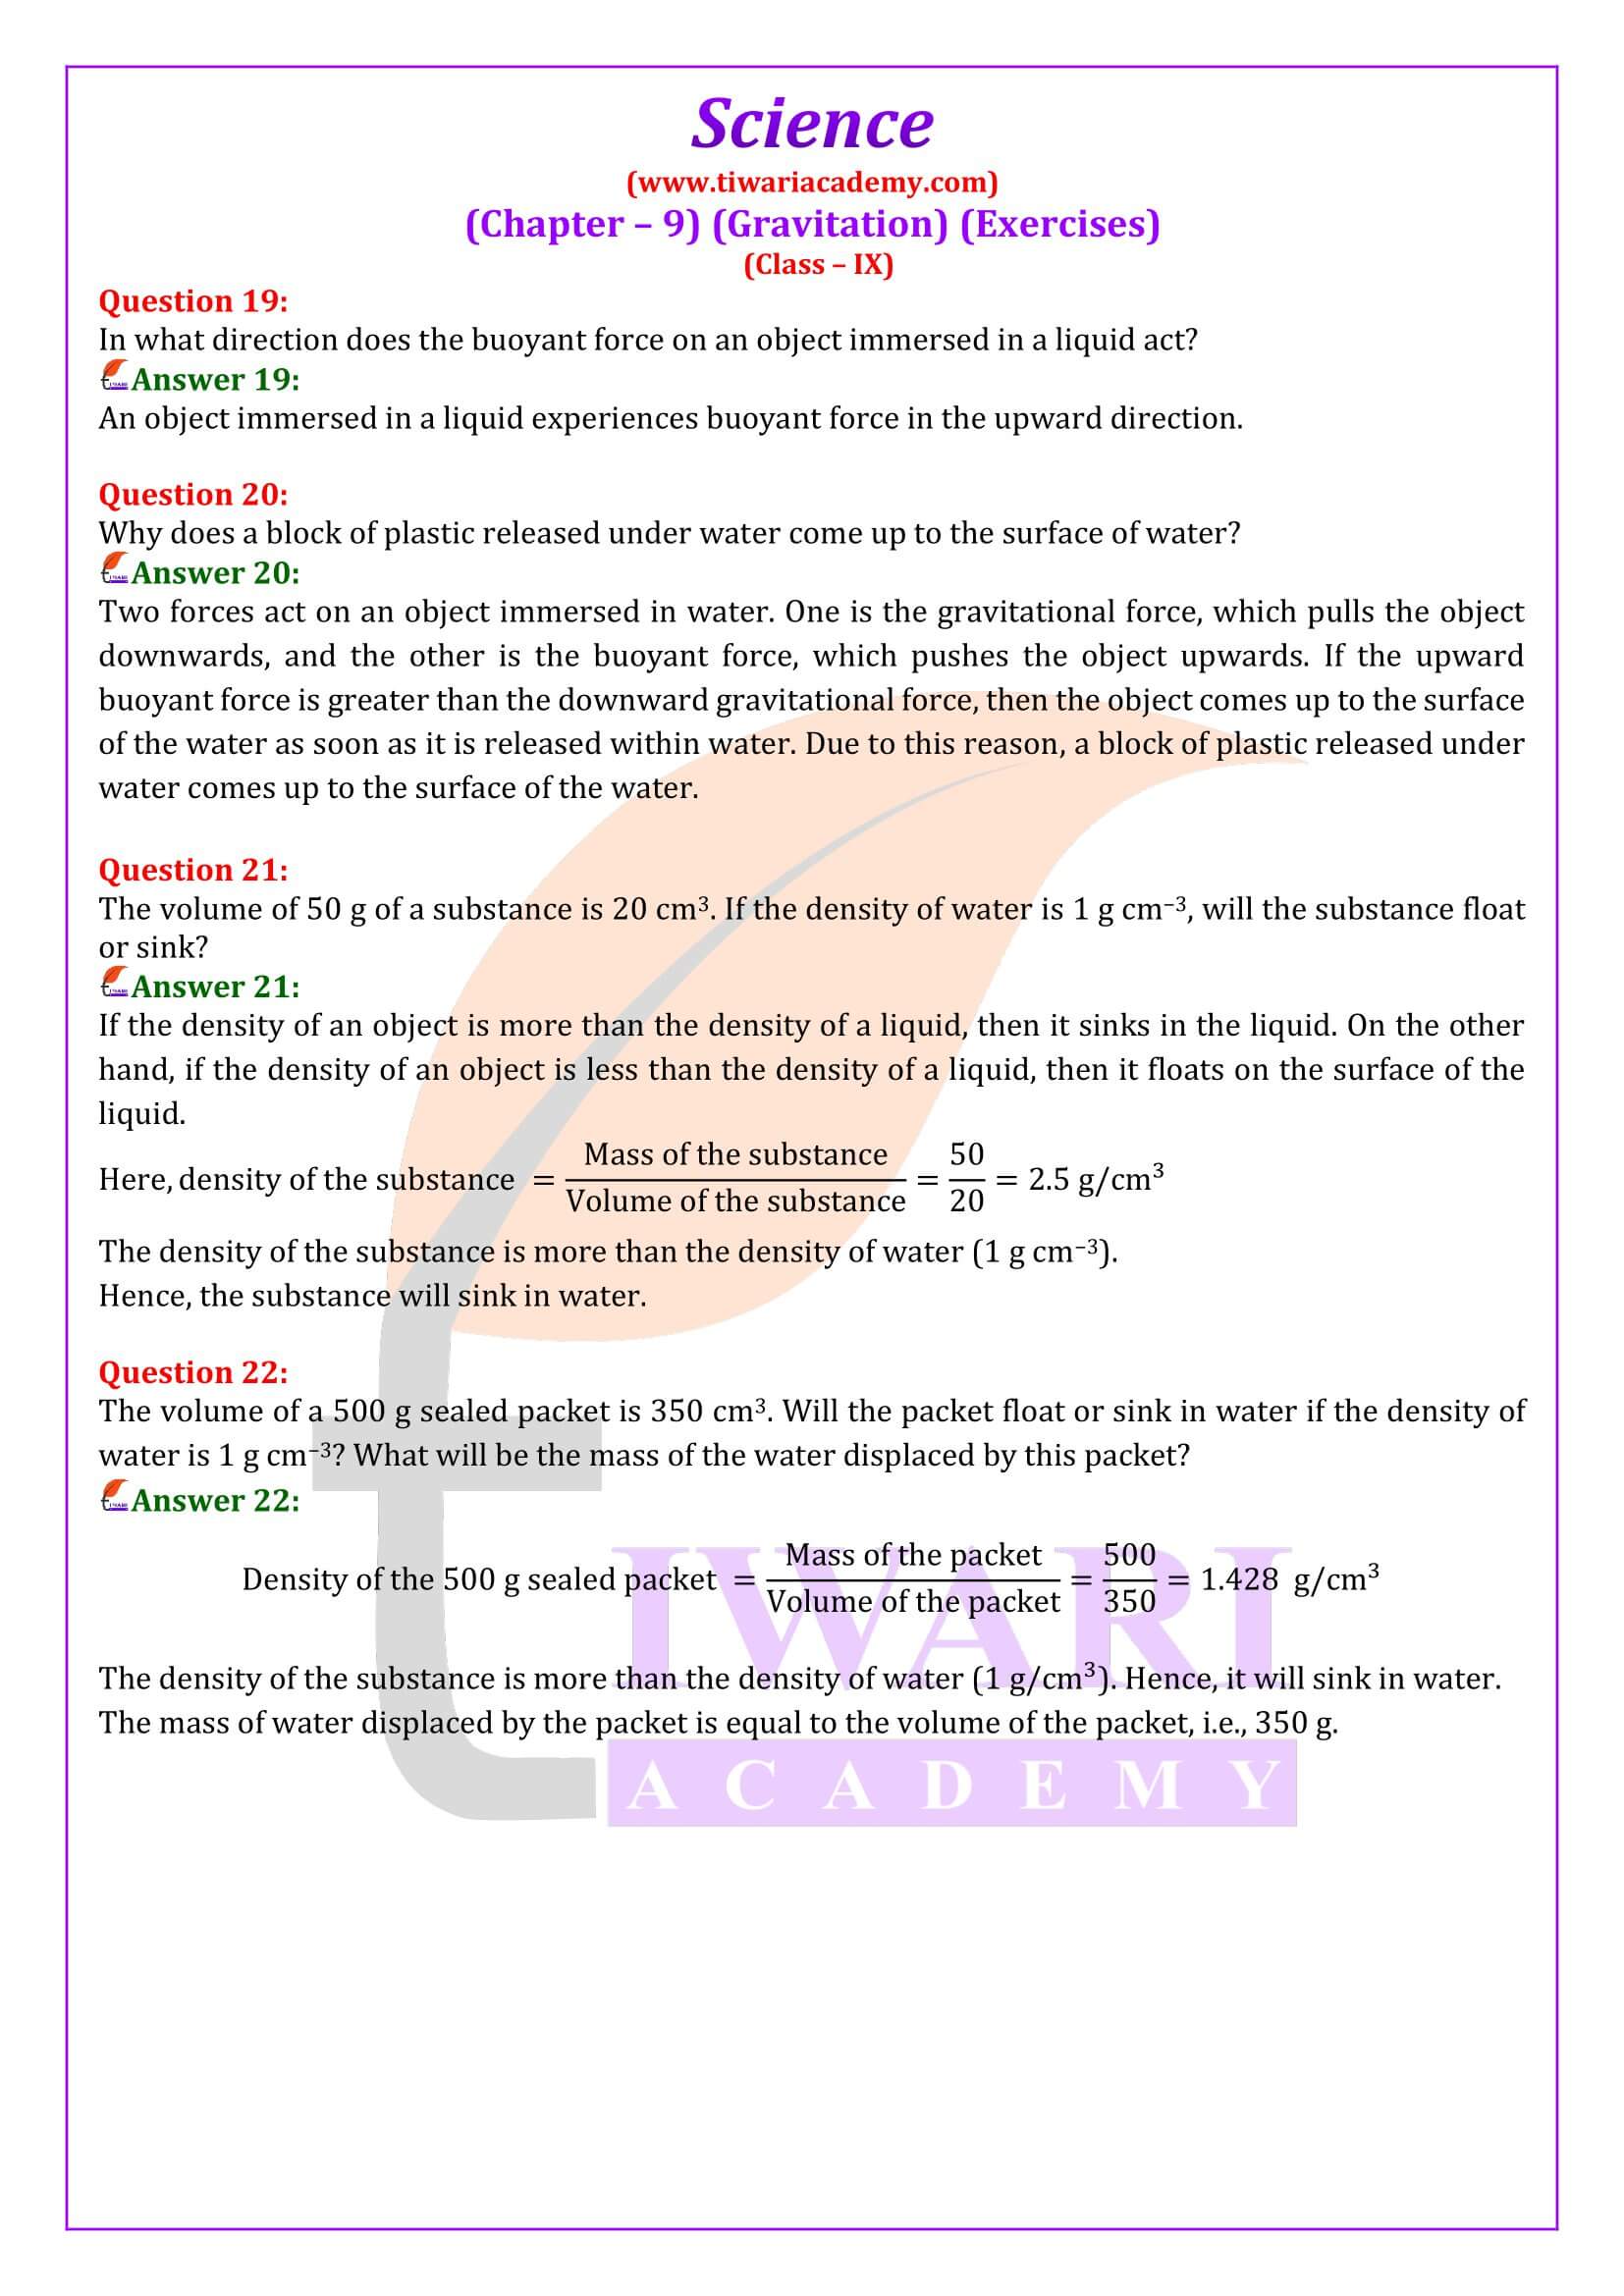 NCERT Solutions for Class 9 Science Chapter 9 guide